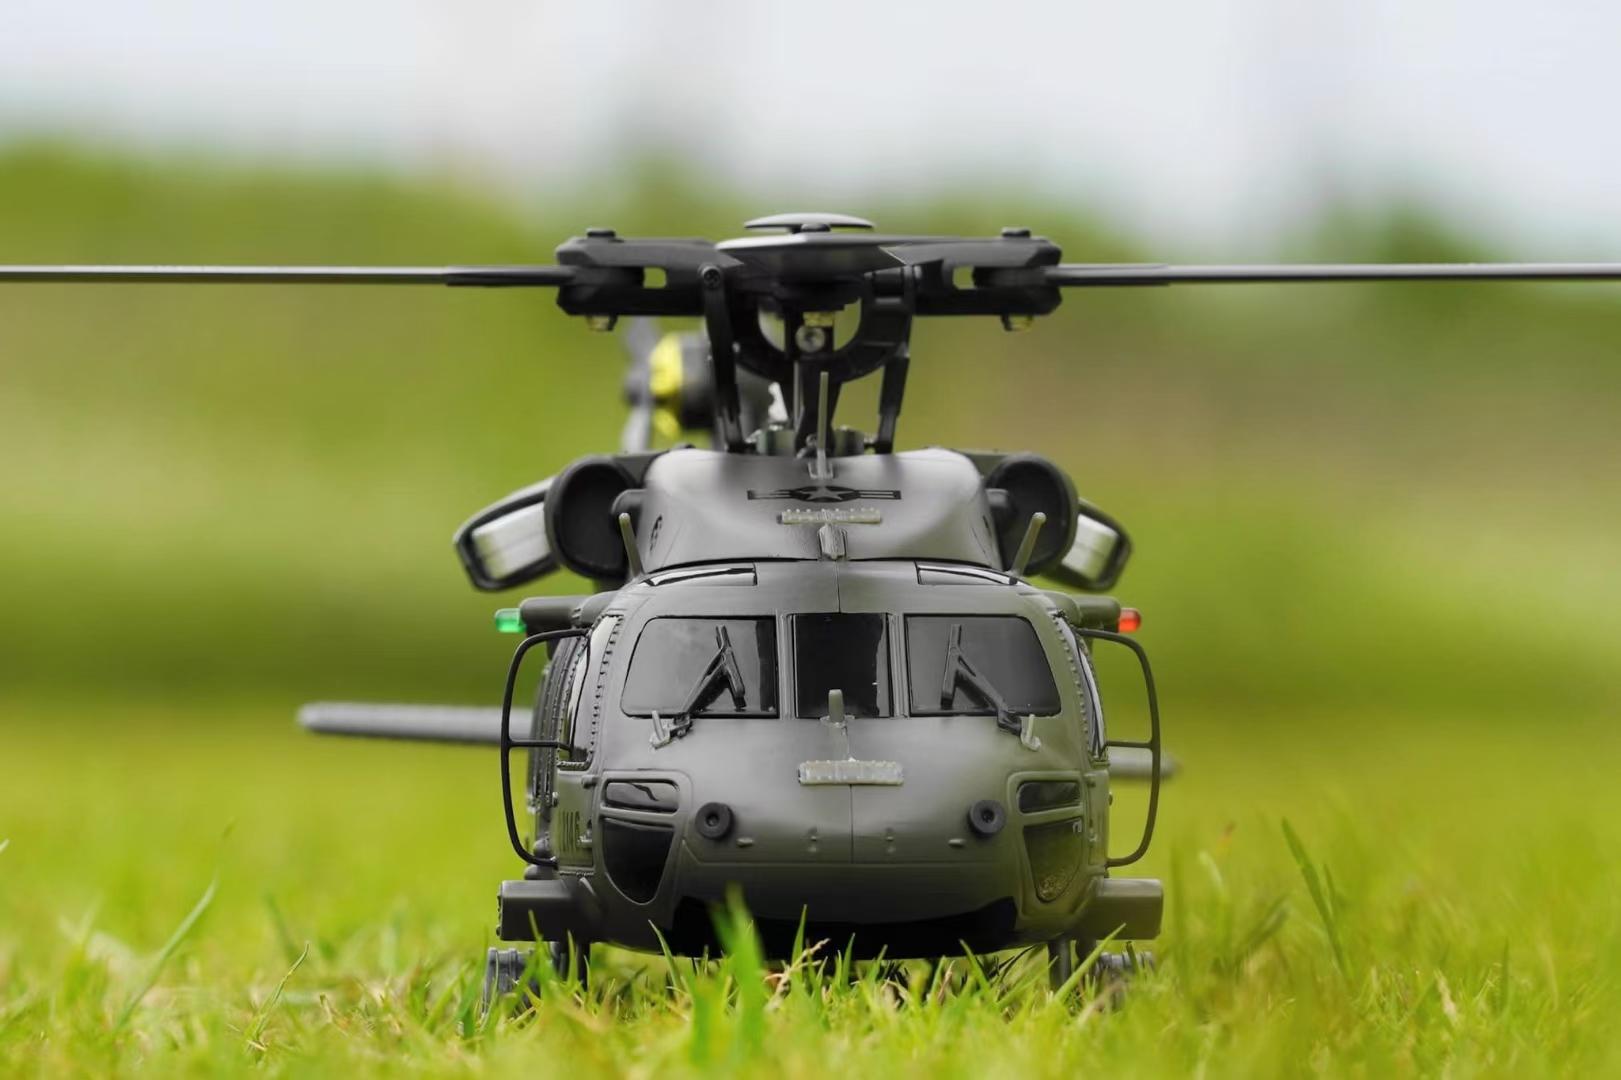 Airwolf Black Bell 222 Electric: Reasonable subheading for this article would be:Efficient and Stylish: The Airwolf Black Bell 222 Electric Helicopter